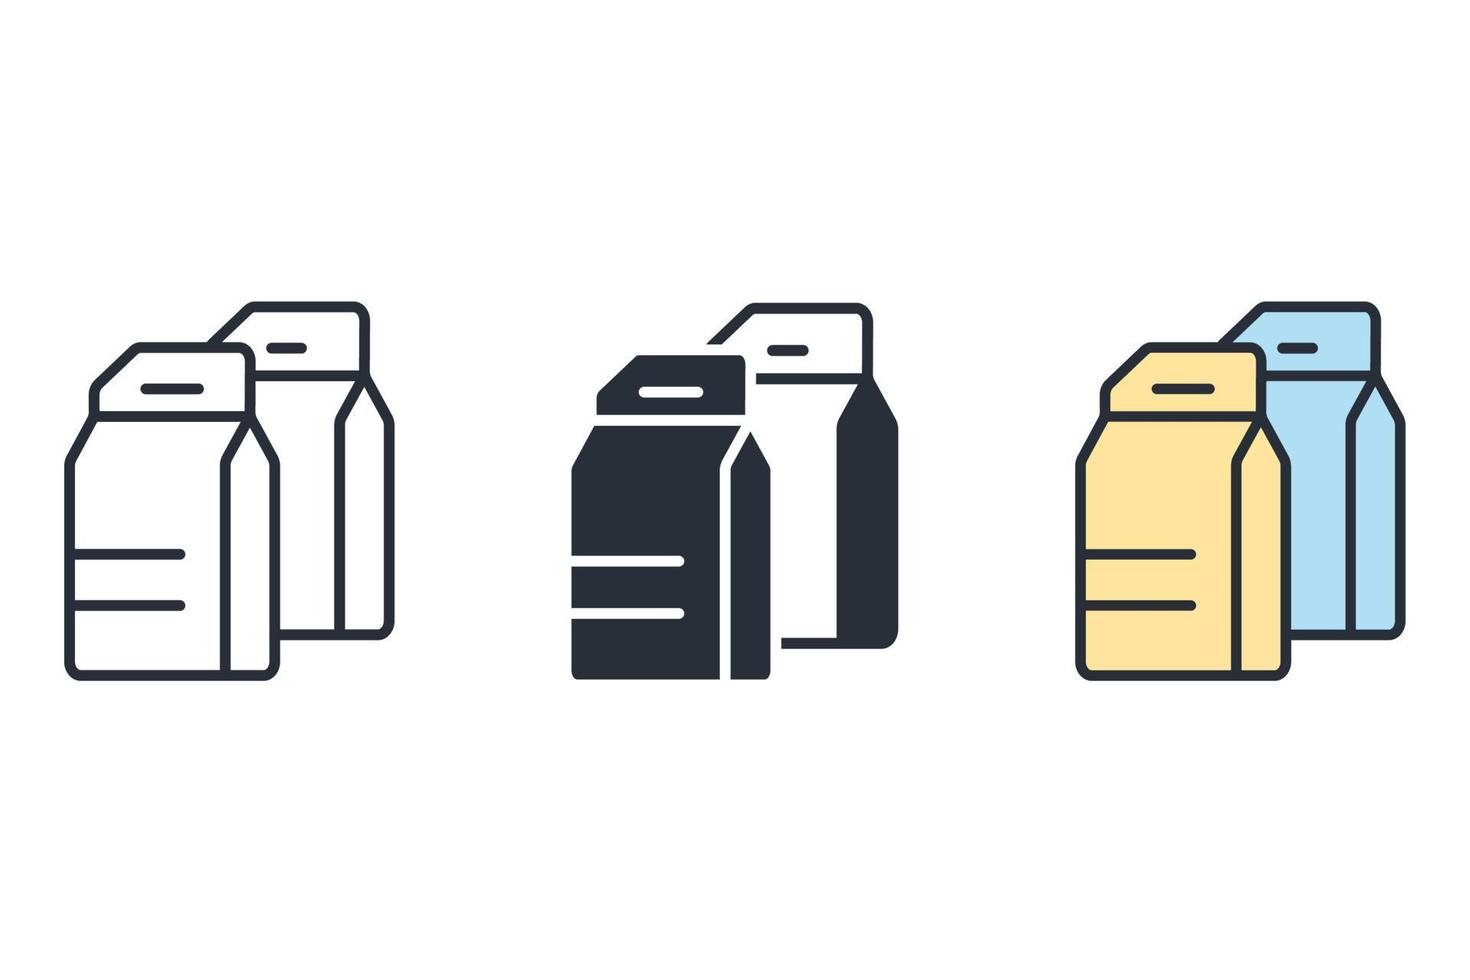 Milk icons  symbol vector elements for infographic web